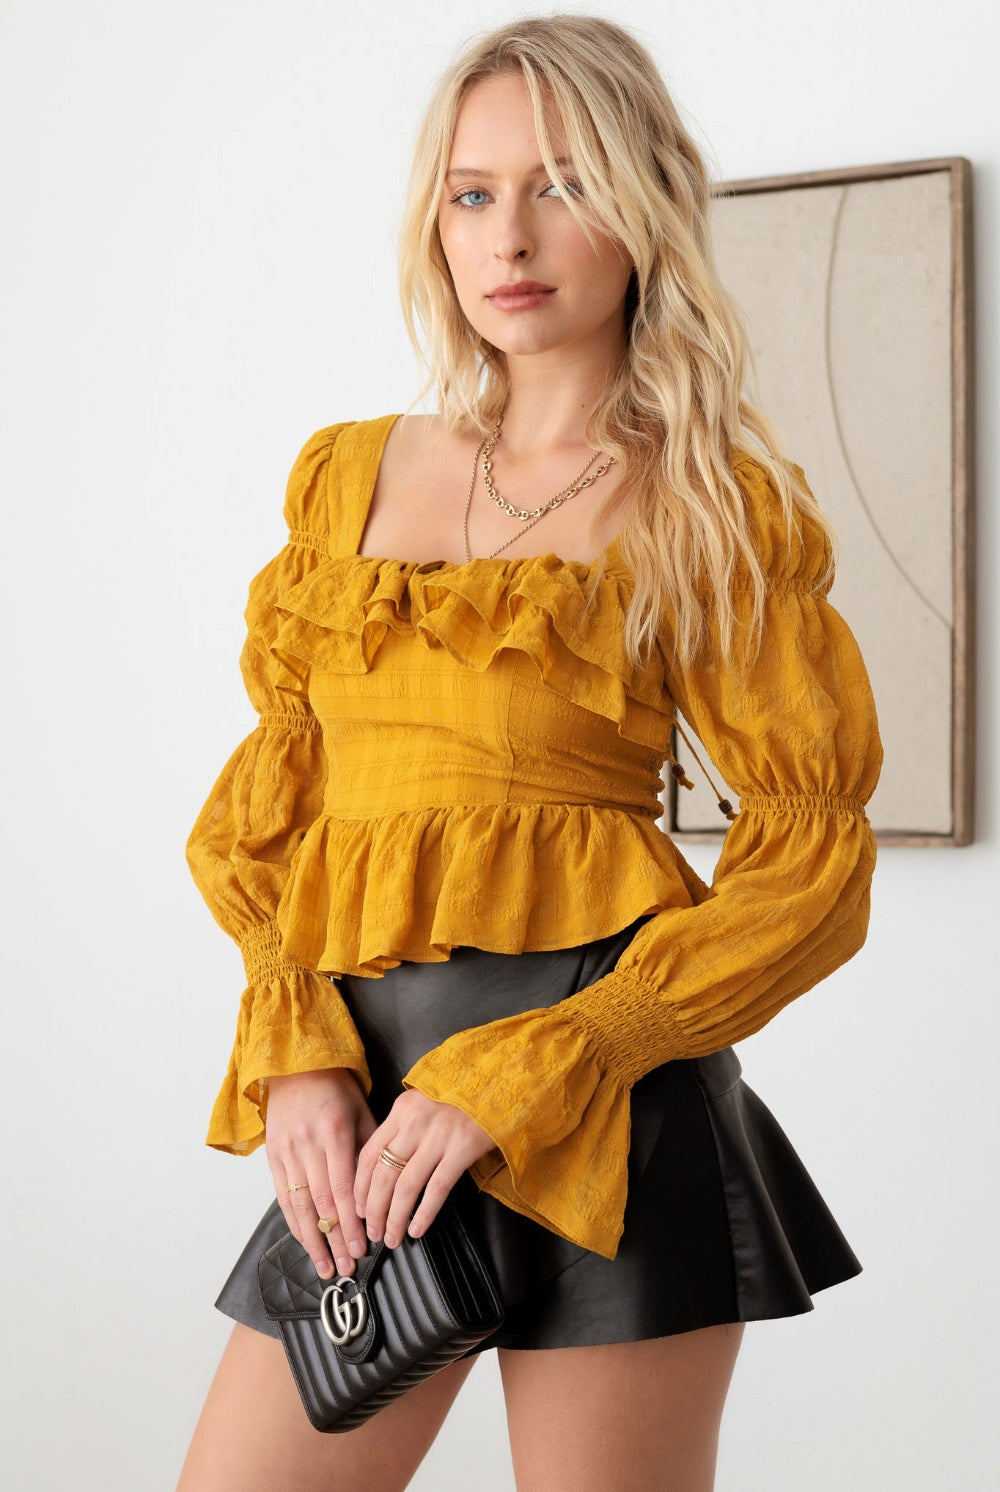 Fashion-forward woman in a mustard boho long sleeve top with delicate ruffle detailing, embodying an effortlessly chic style.